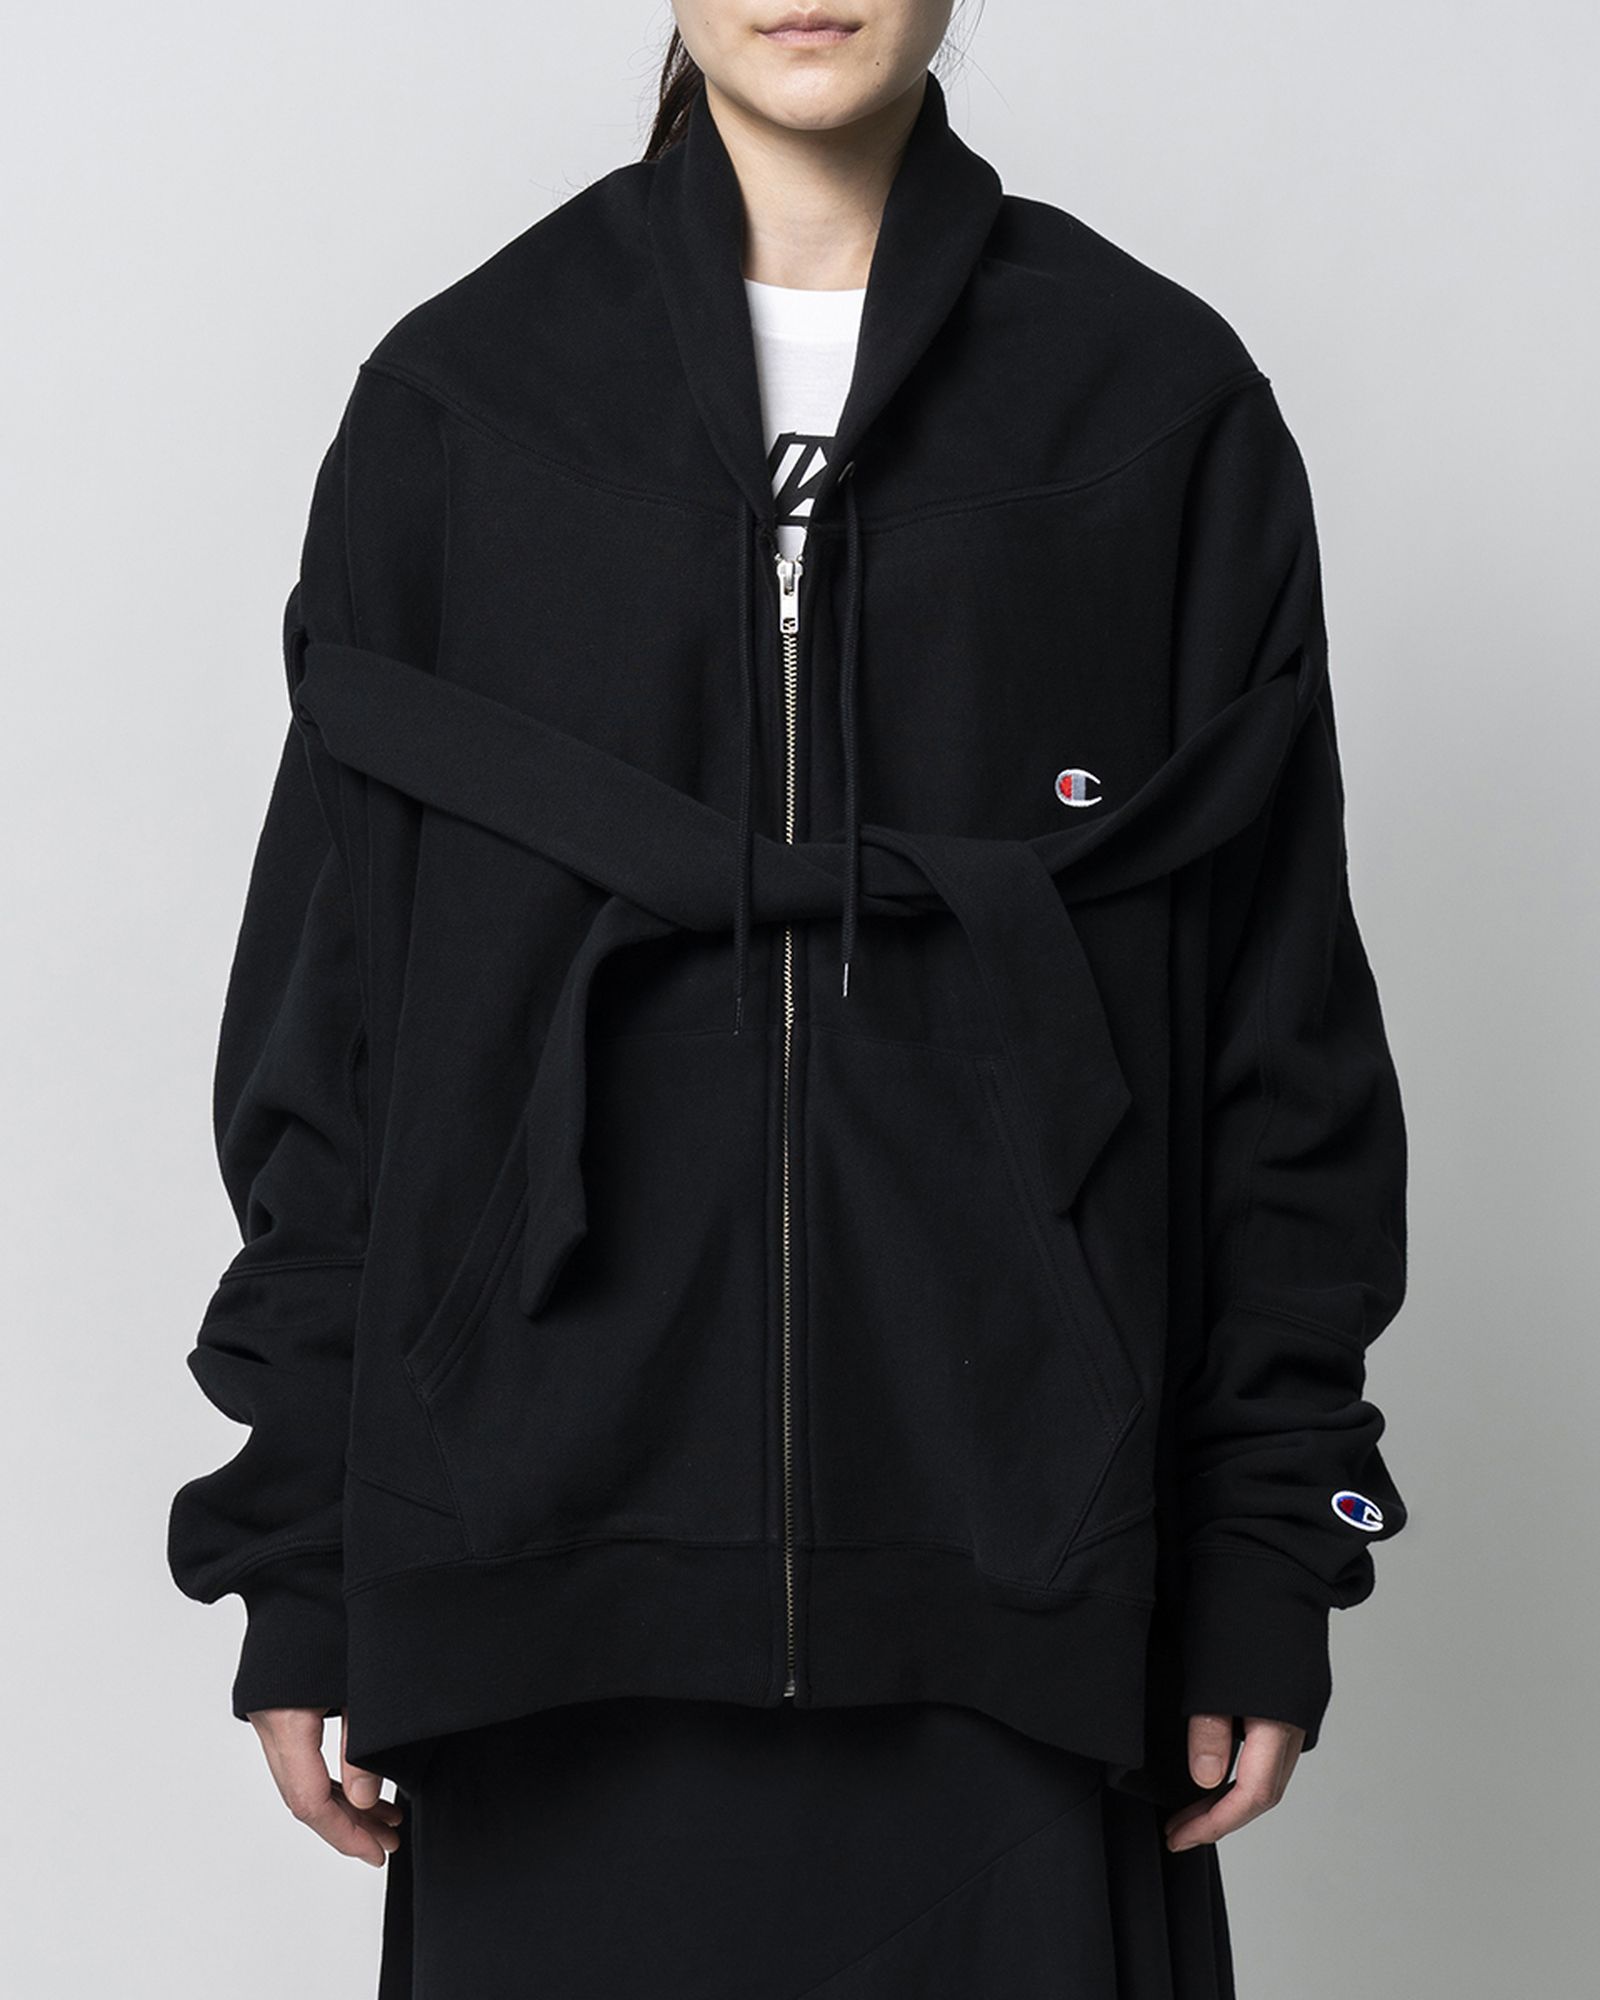 champion-anrealage-japan-collab-collection (4)